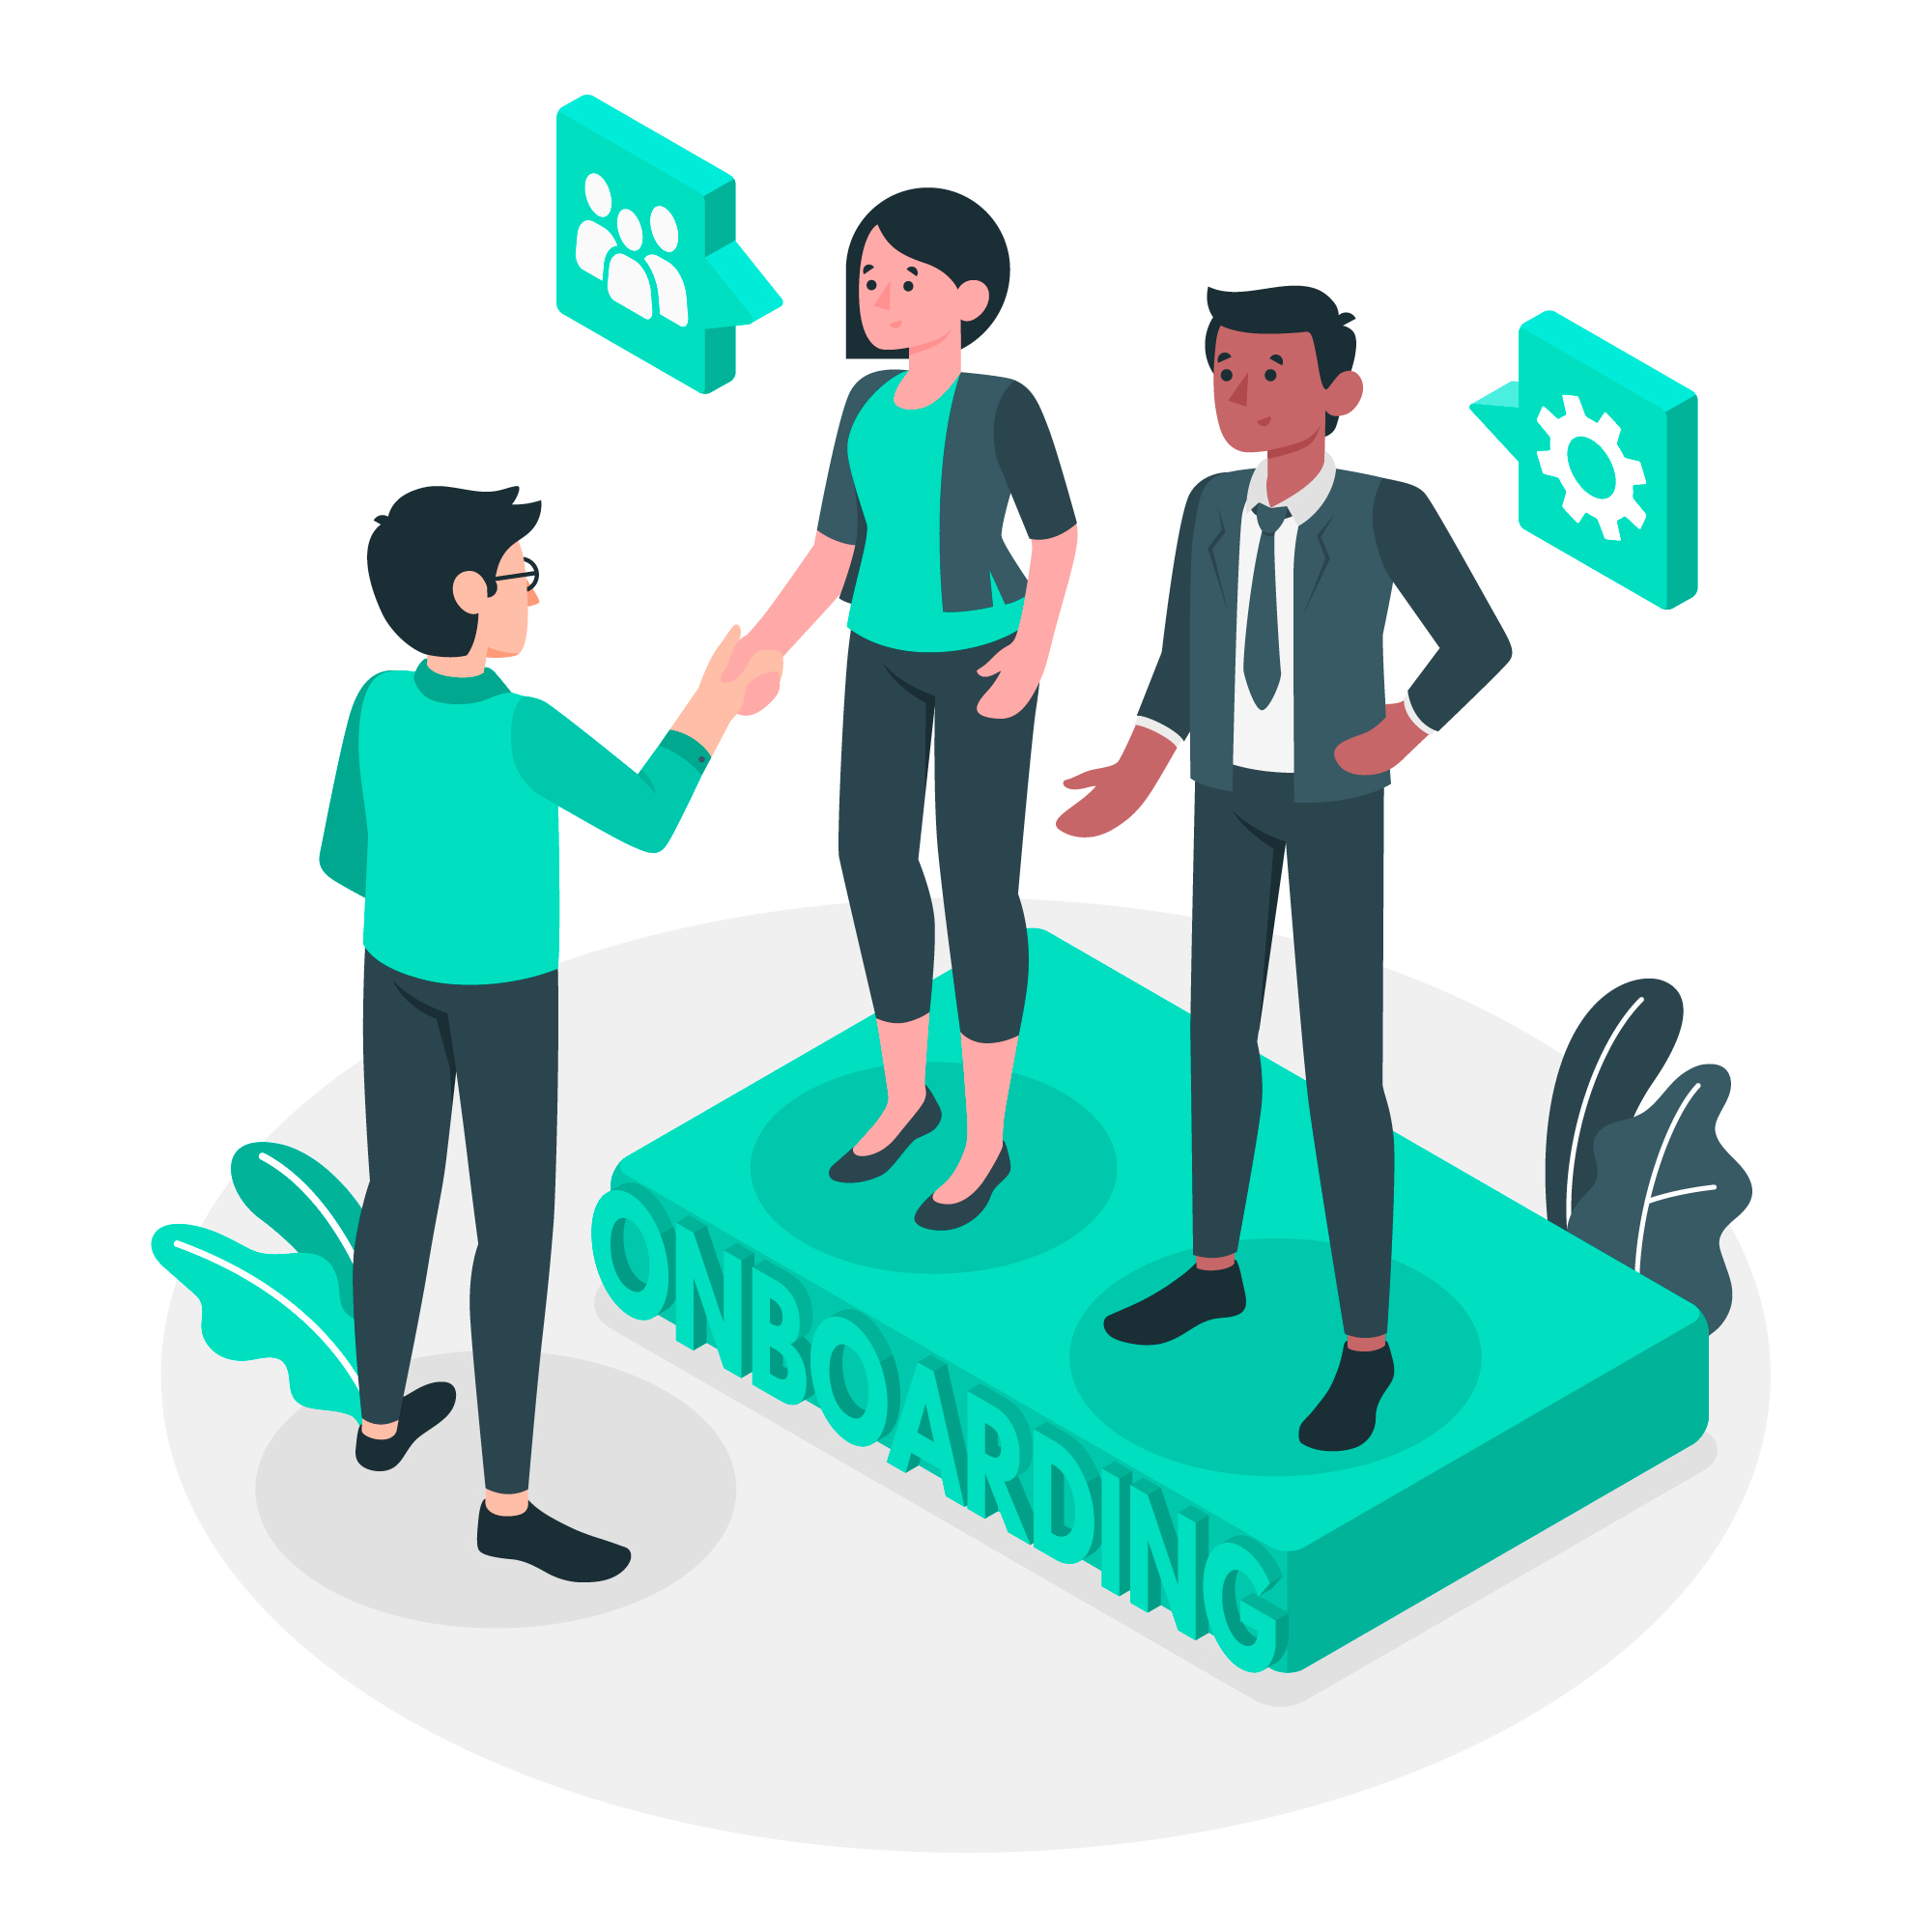 3 Onboarding best practices: how to onboard new employees缩略图